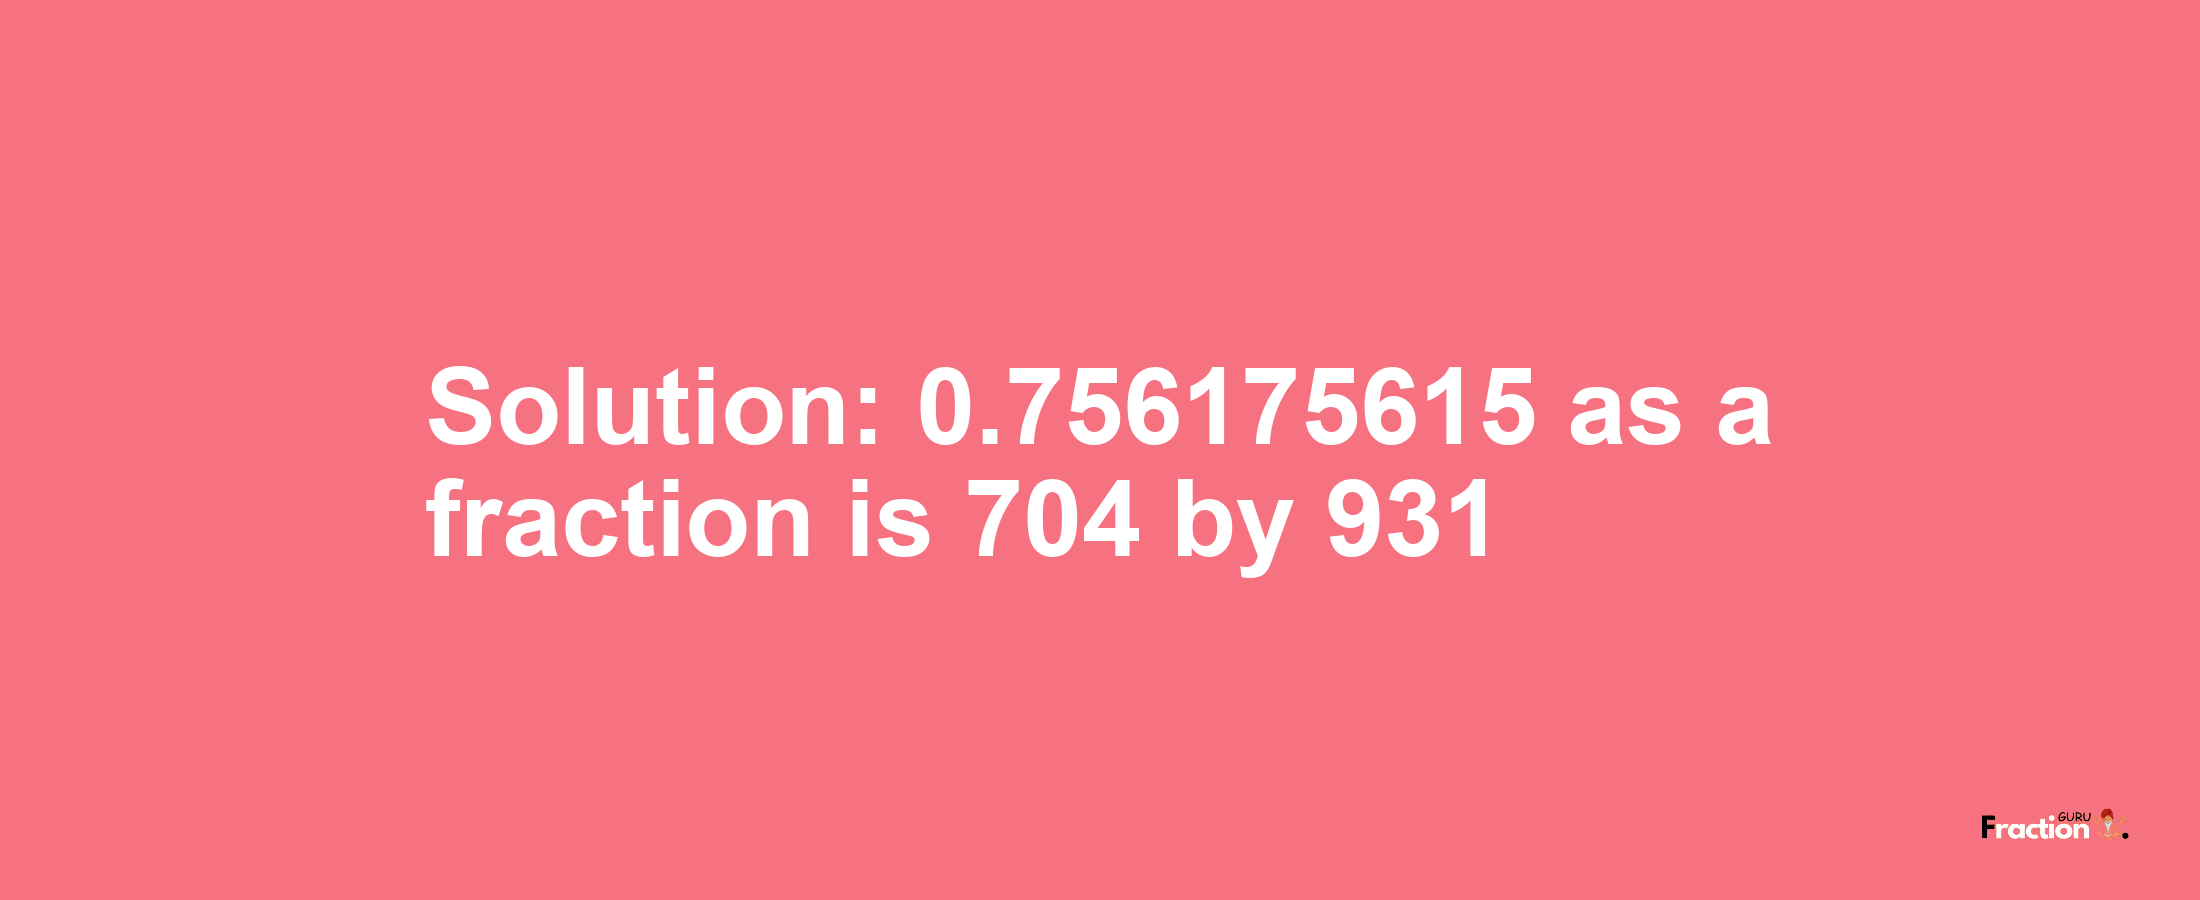 Solution:0.756175615 as a fraction is 704/931